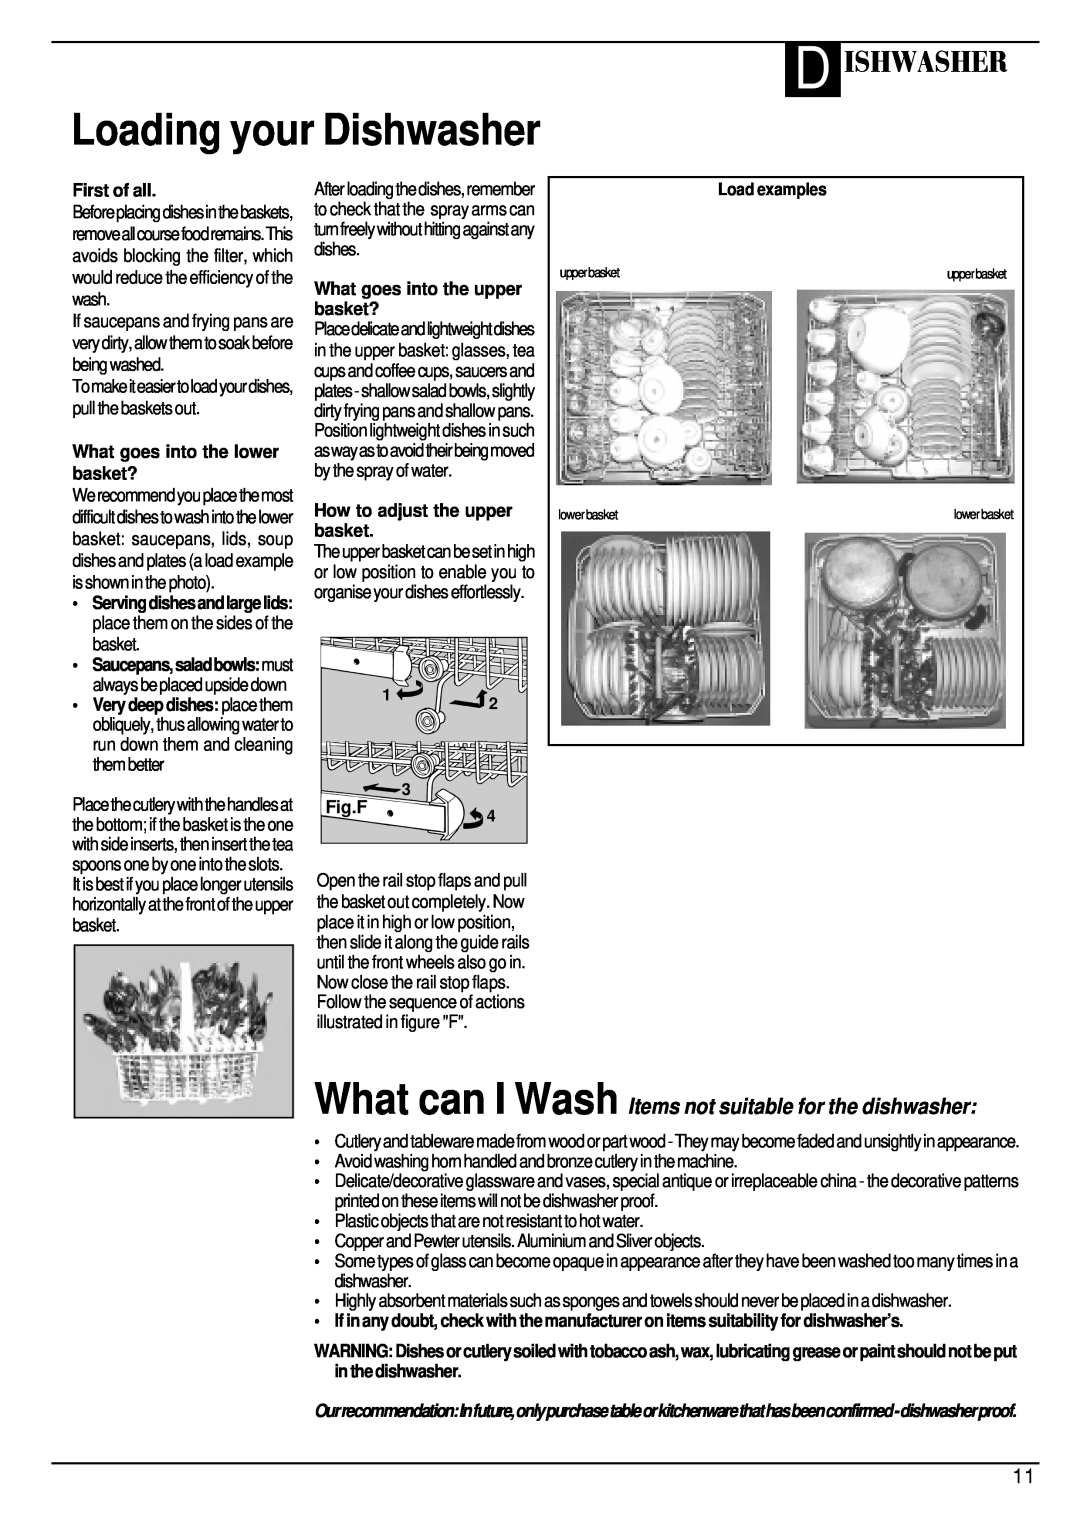 Hotpoint BFV62 Loading your Dishwasher, D Ishwasher, First of all, What goes into the lower basket?, Fig.F, Load examples 